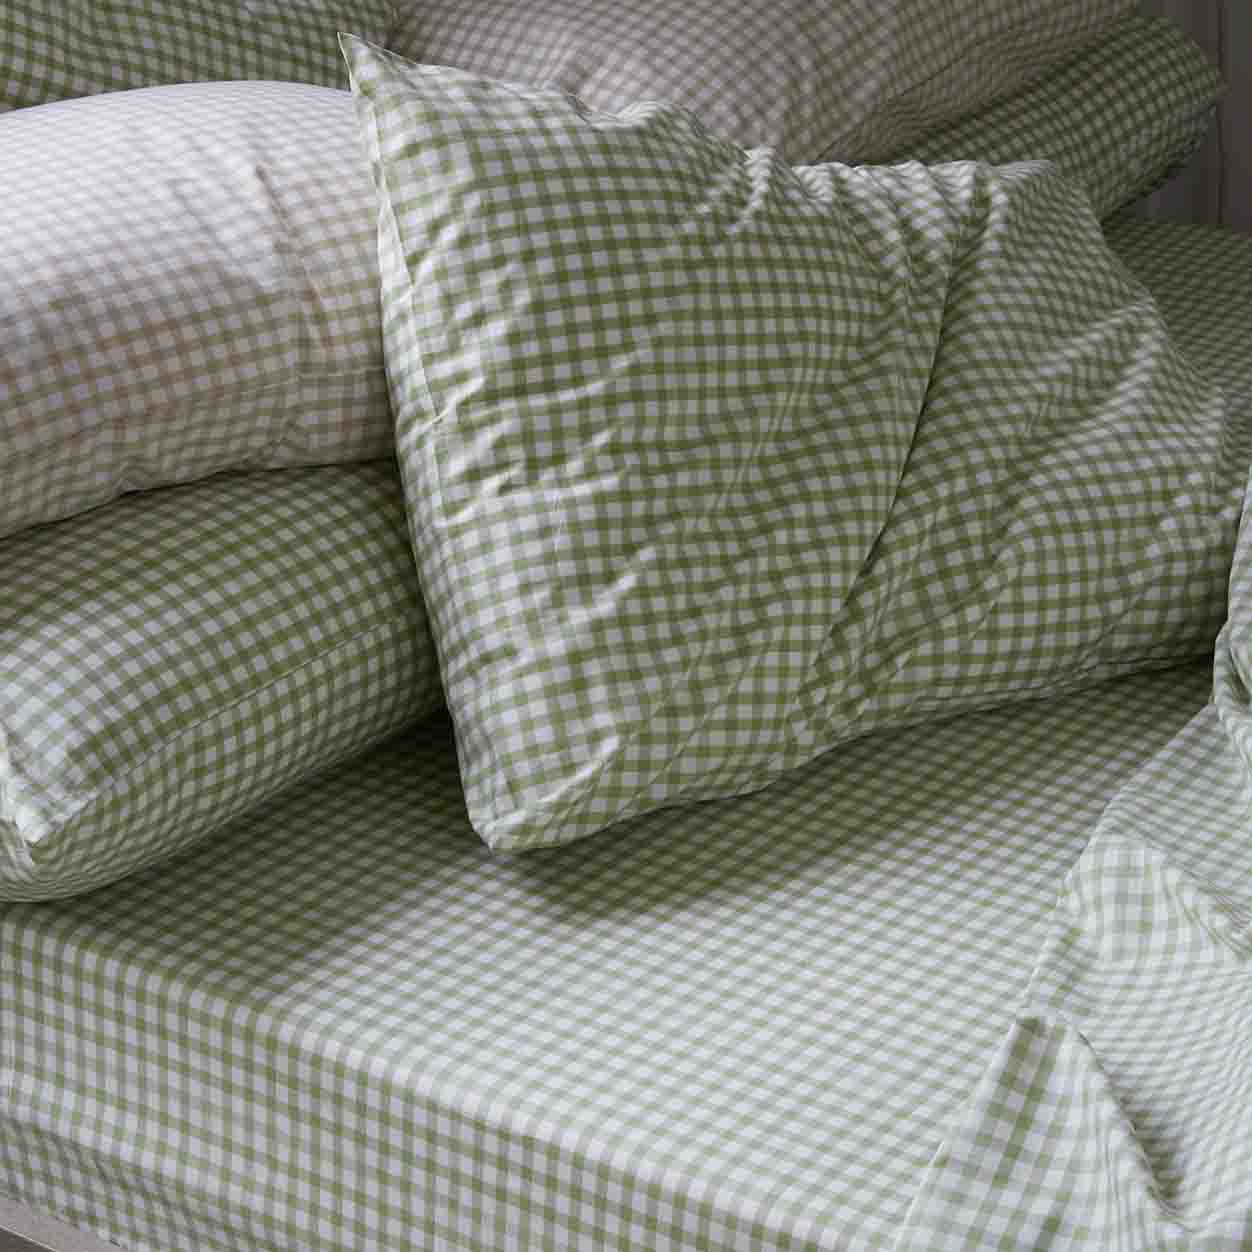 Pear and Cafe Au Lait  Small Gingham Cotton Bedding